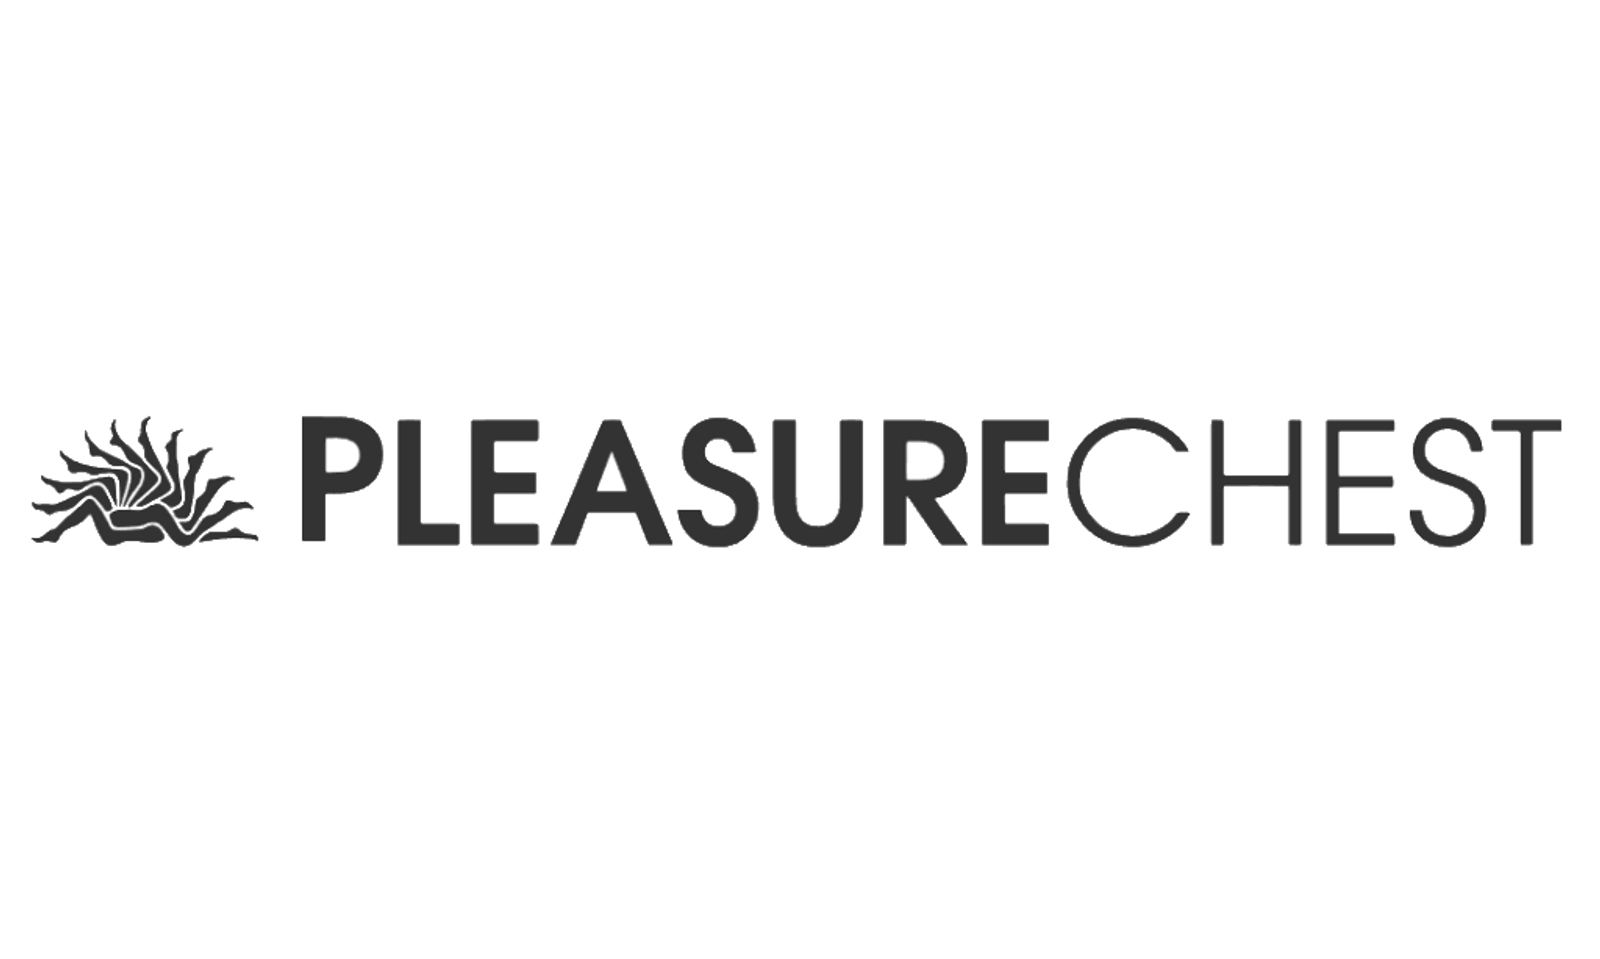 Jessica Drake to Give Porn Literacy Talk at the Pleasure Chest